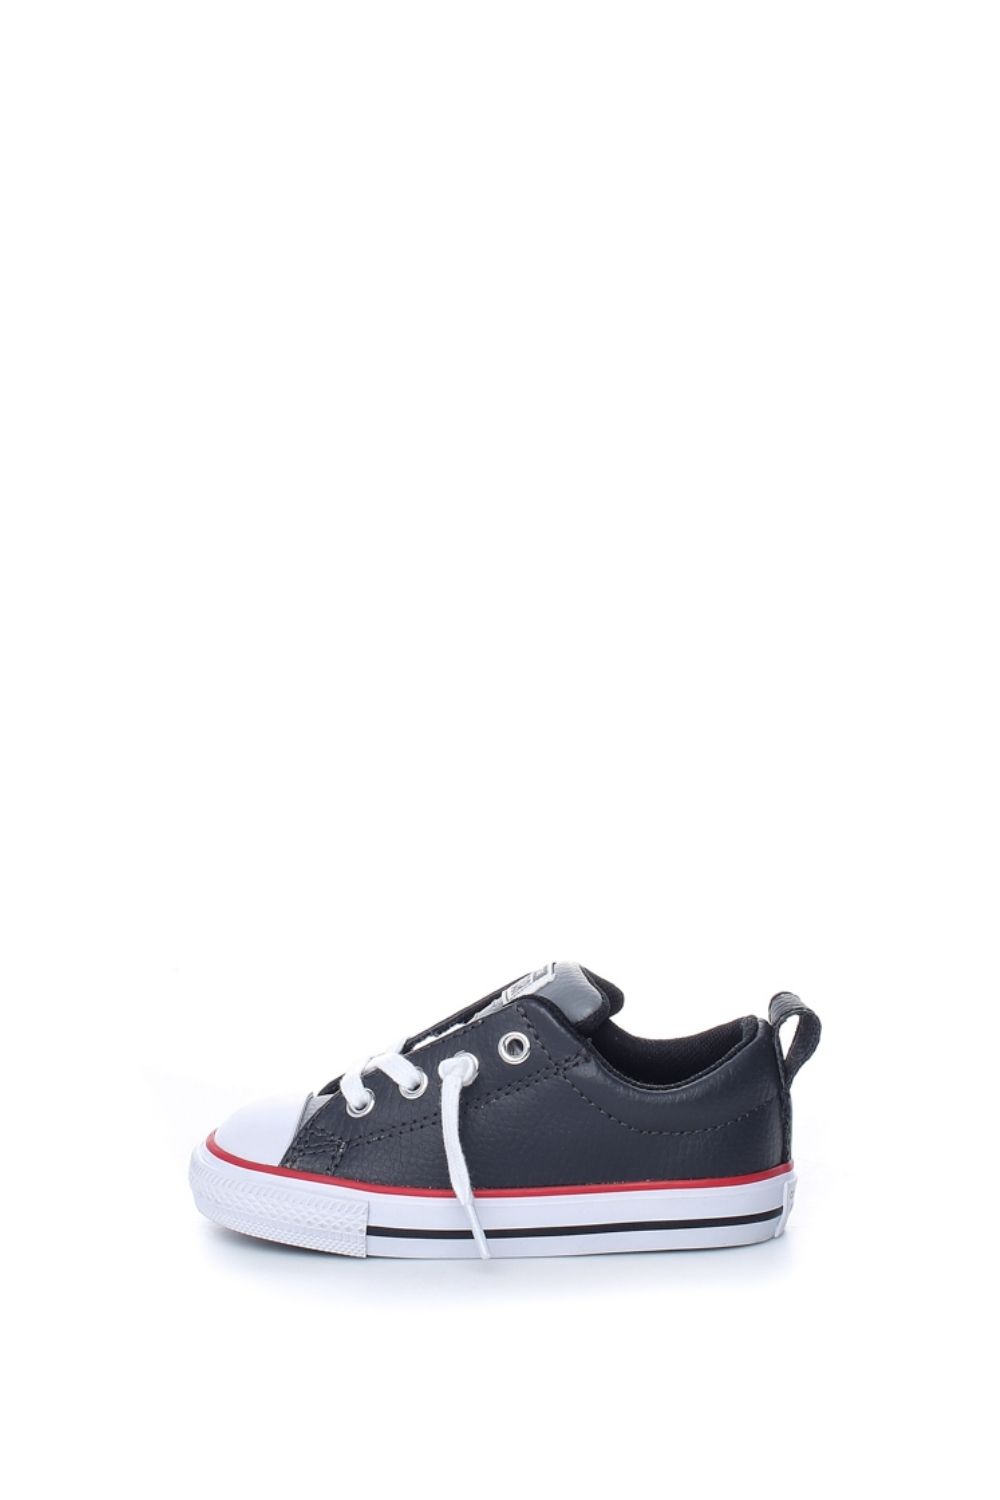 CONVERSE – Βρεφικα sneakers CONVERSE CHUCK TAYLOR ALL STAR STREET μαυρα